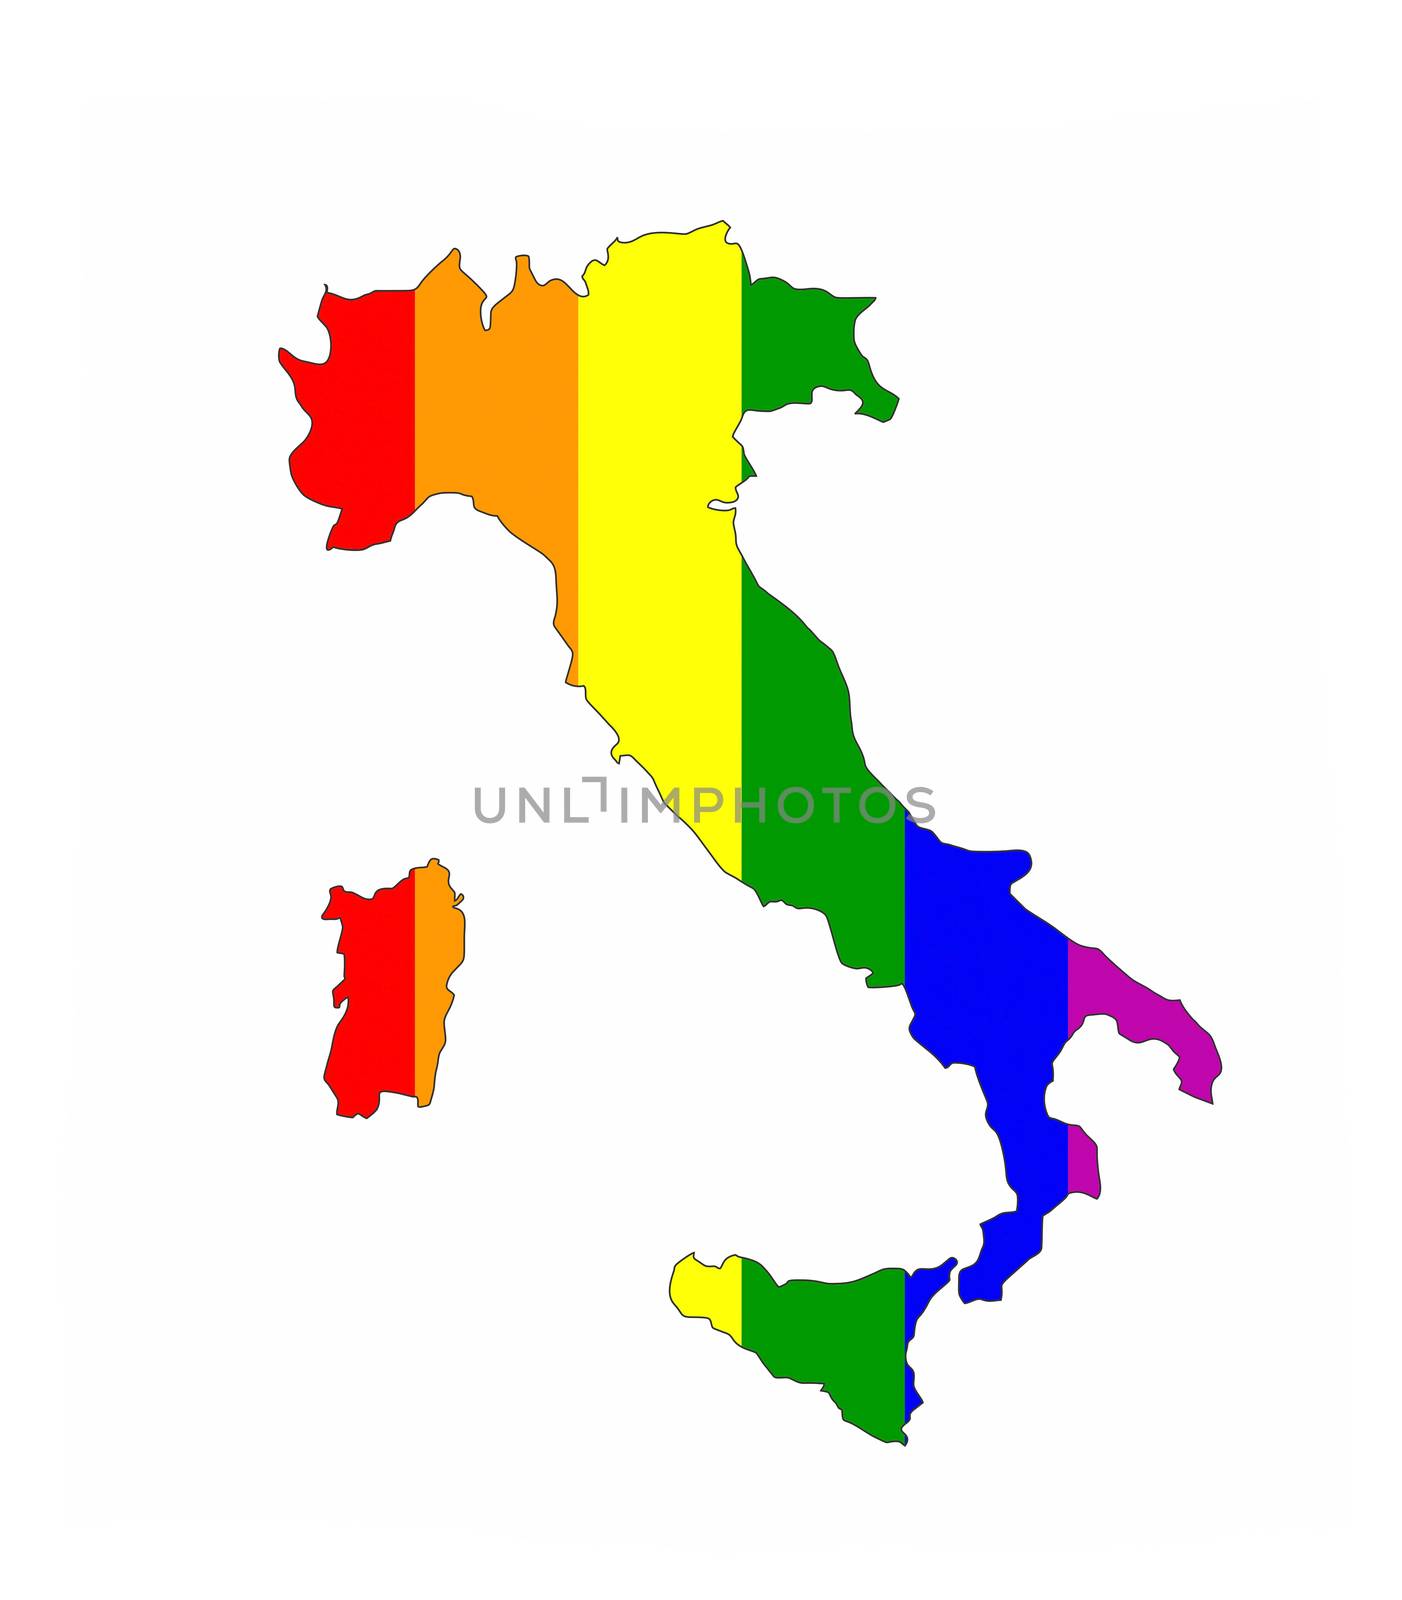 italy country gay pride flag map shape 